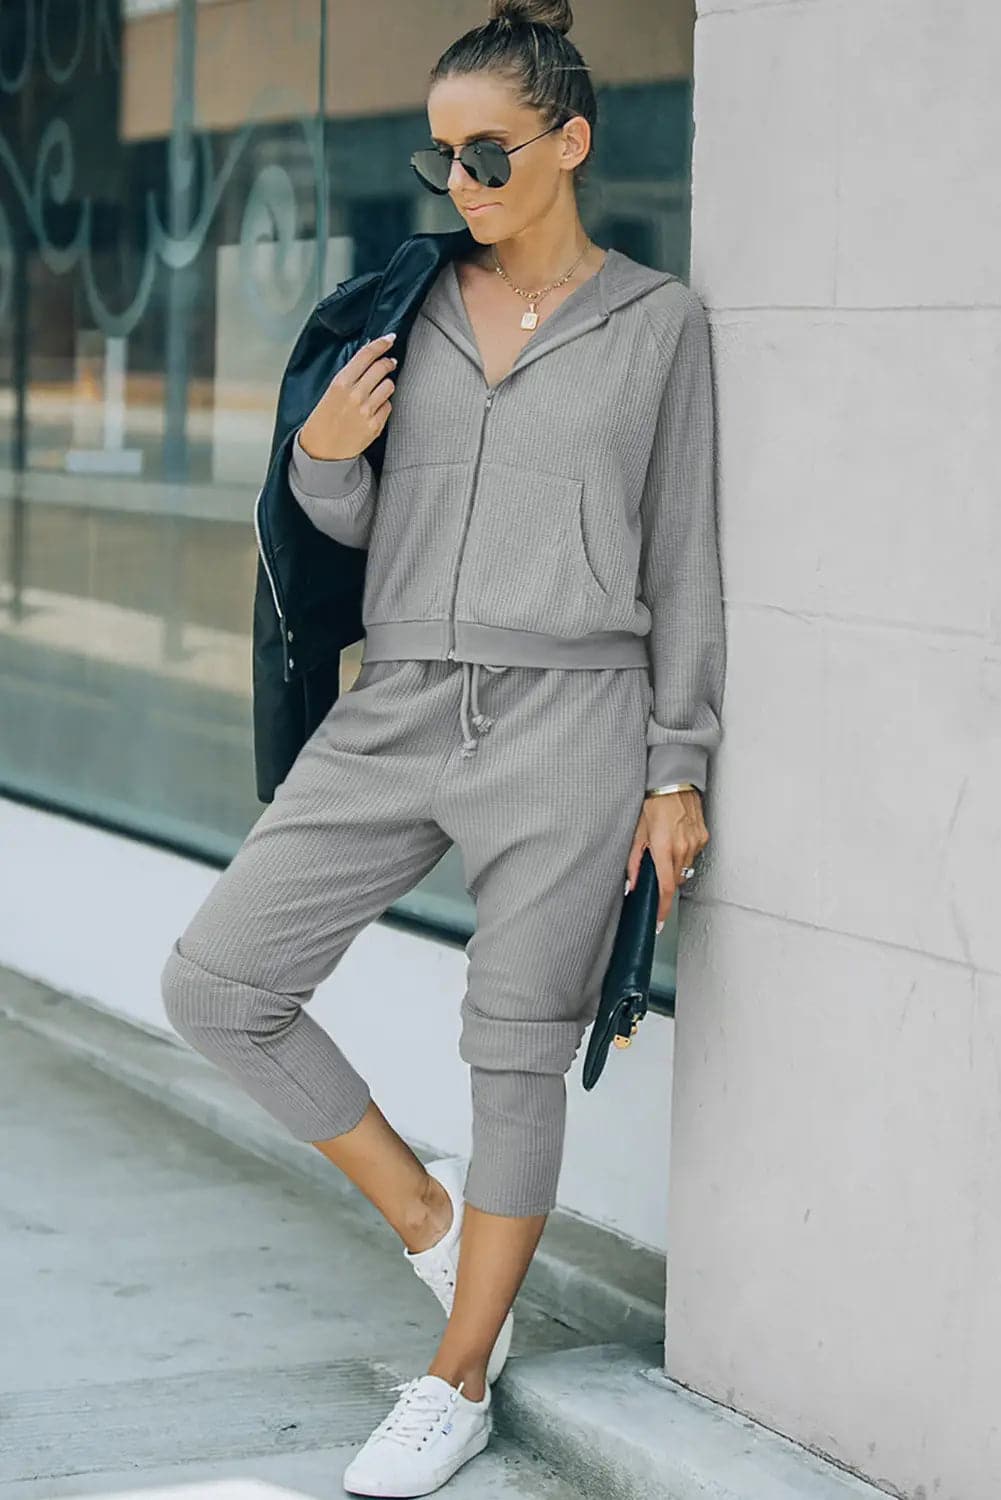 Brown Waffle Knit Zip - Up Hoodie and Pants Athleisure Outfit - Activewear